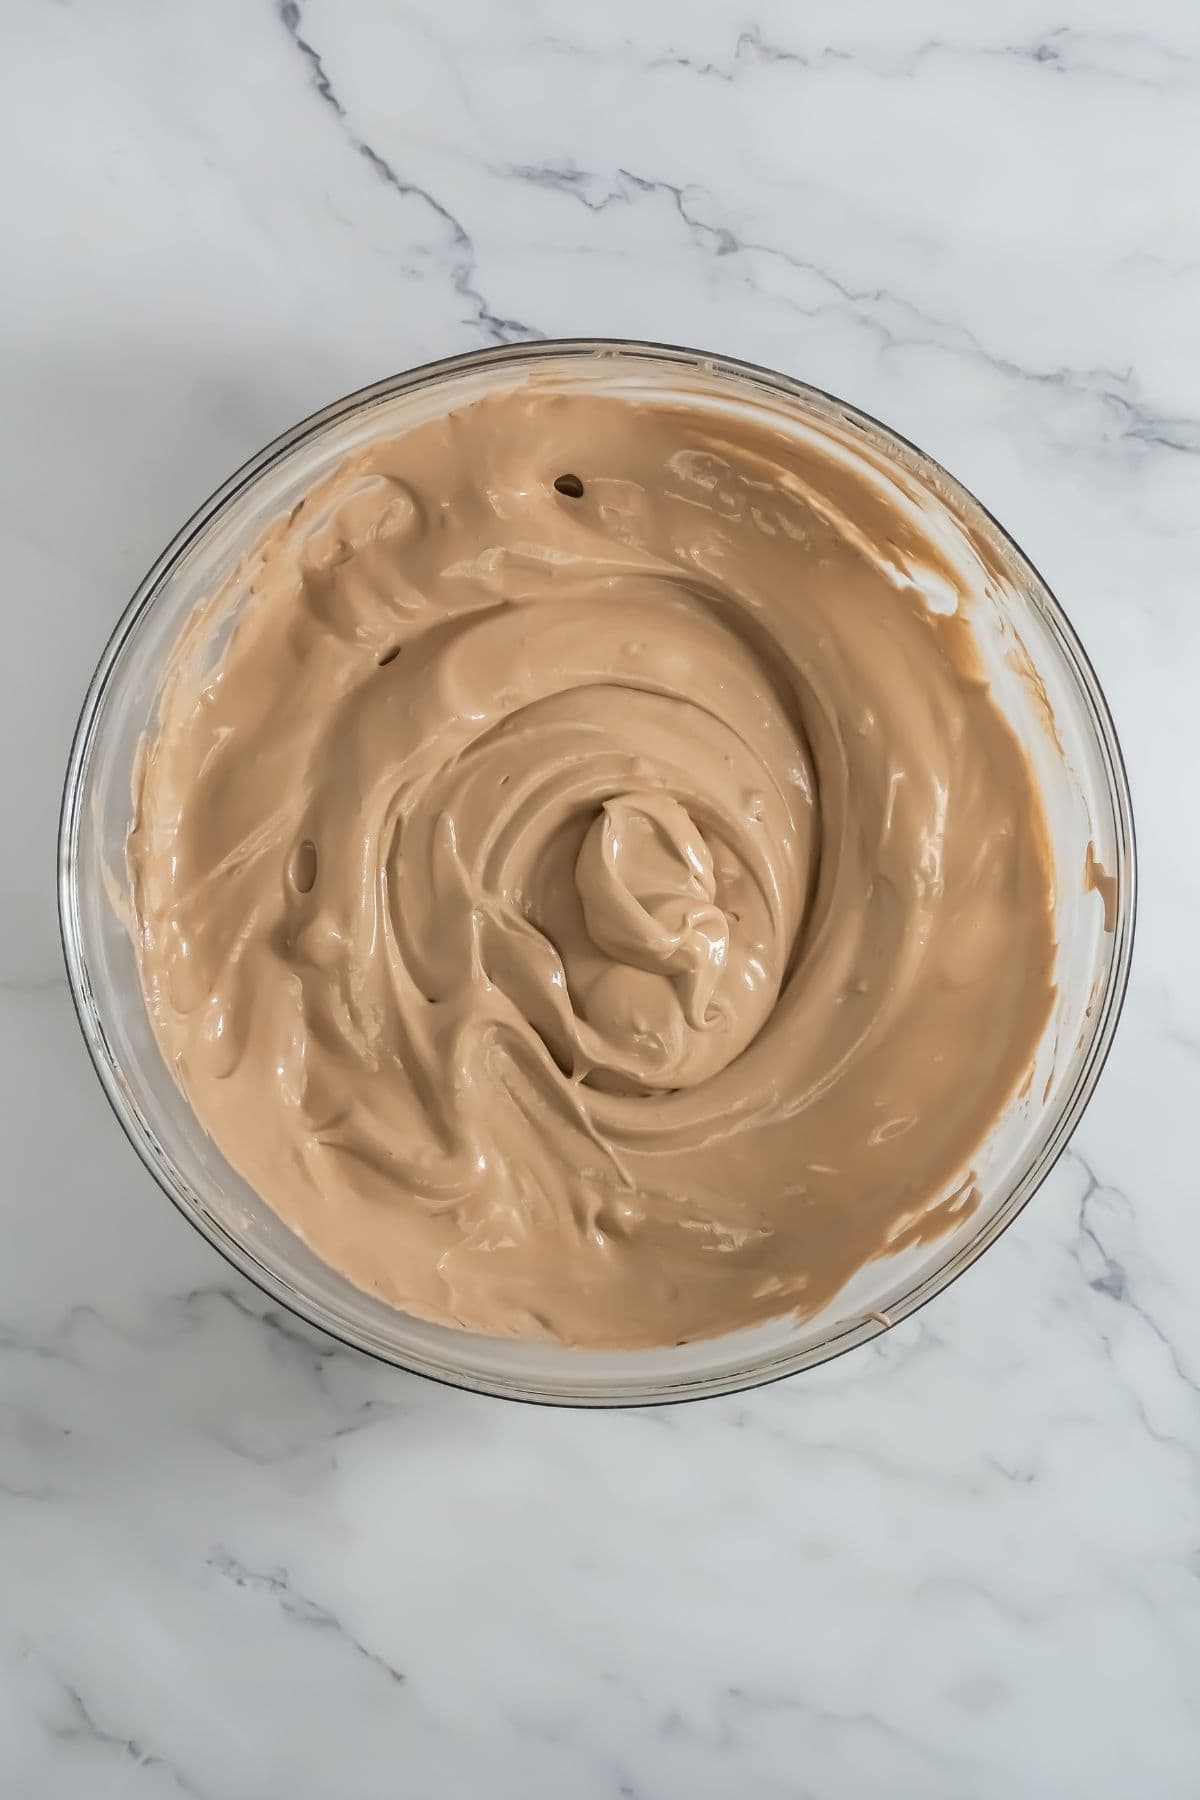 Swirled chocolate pudding dip from above.